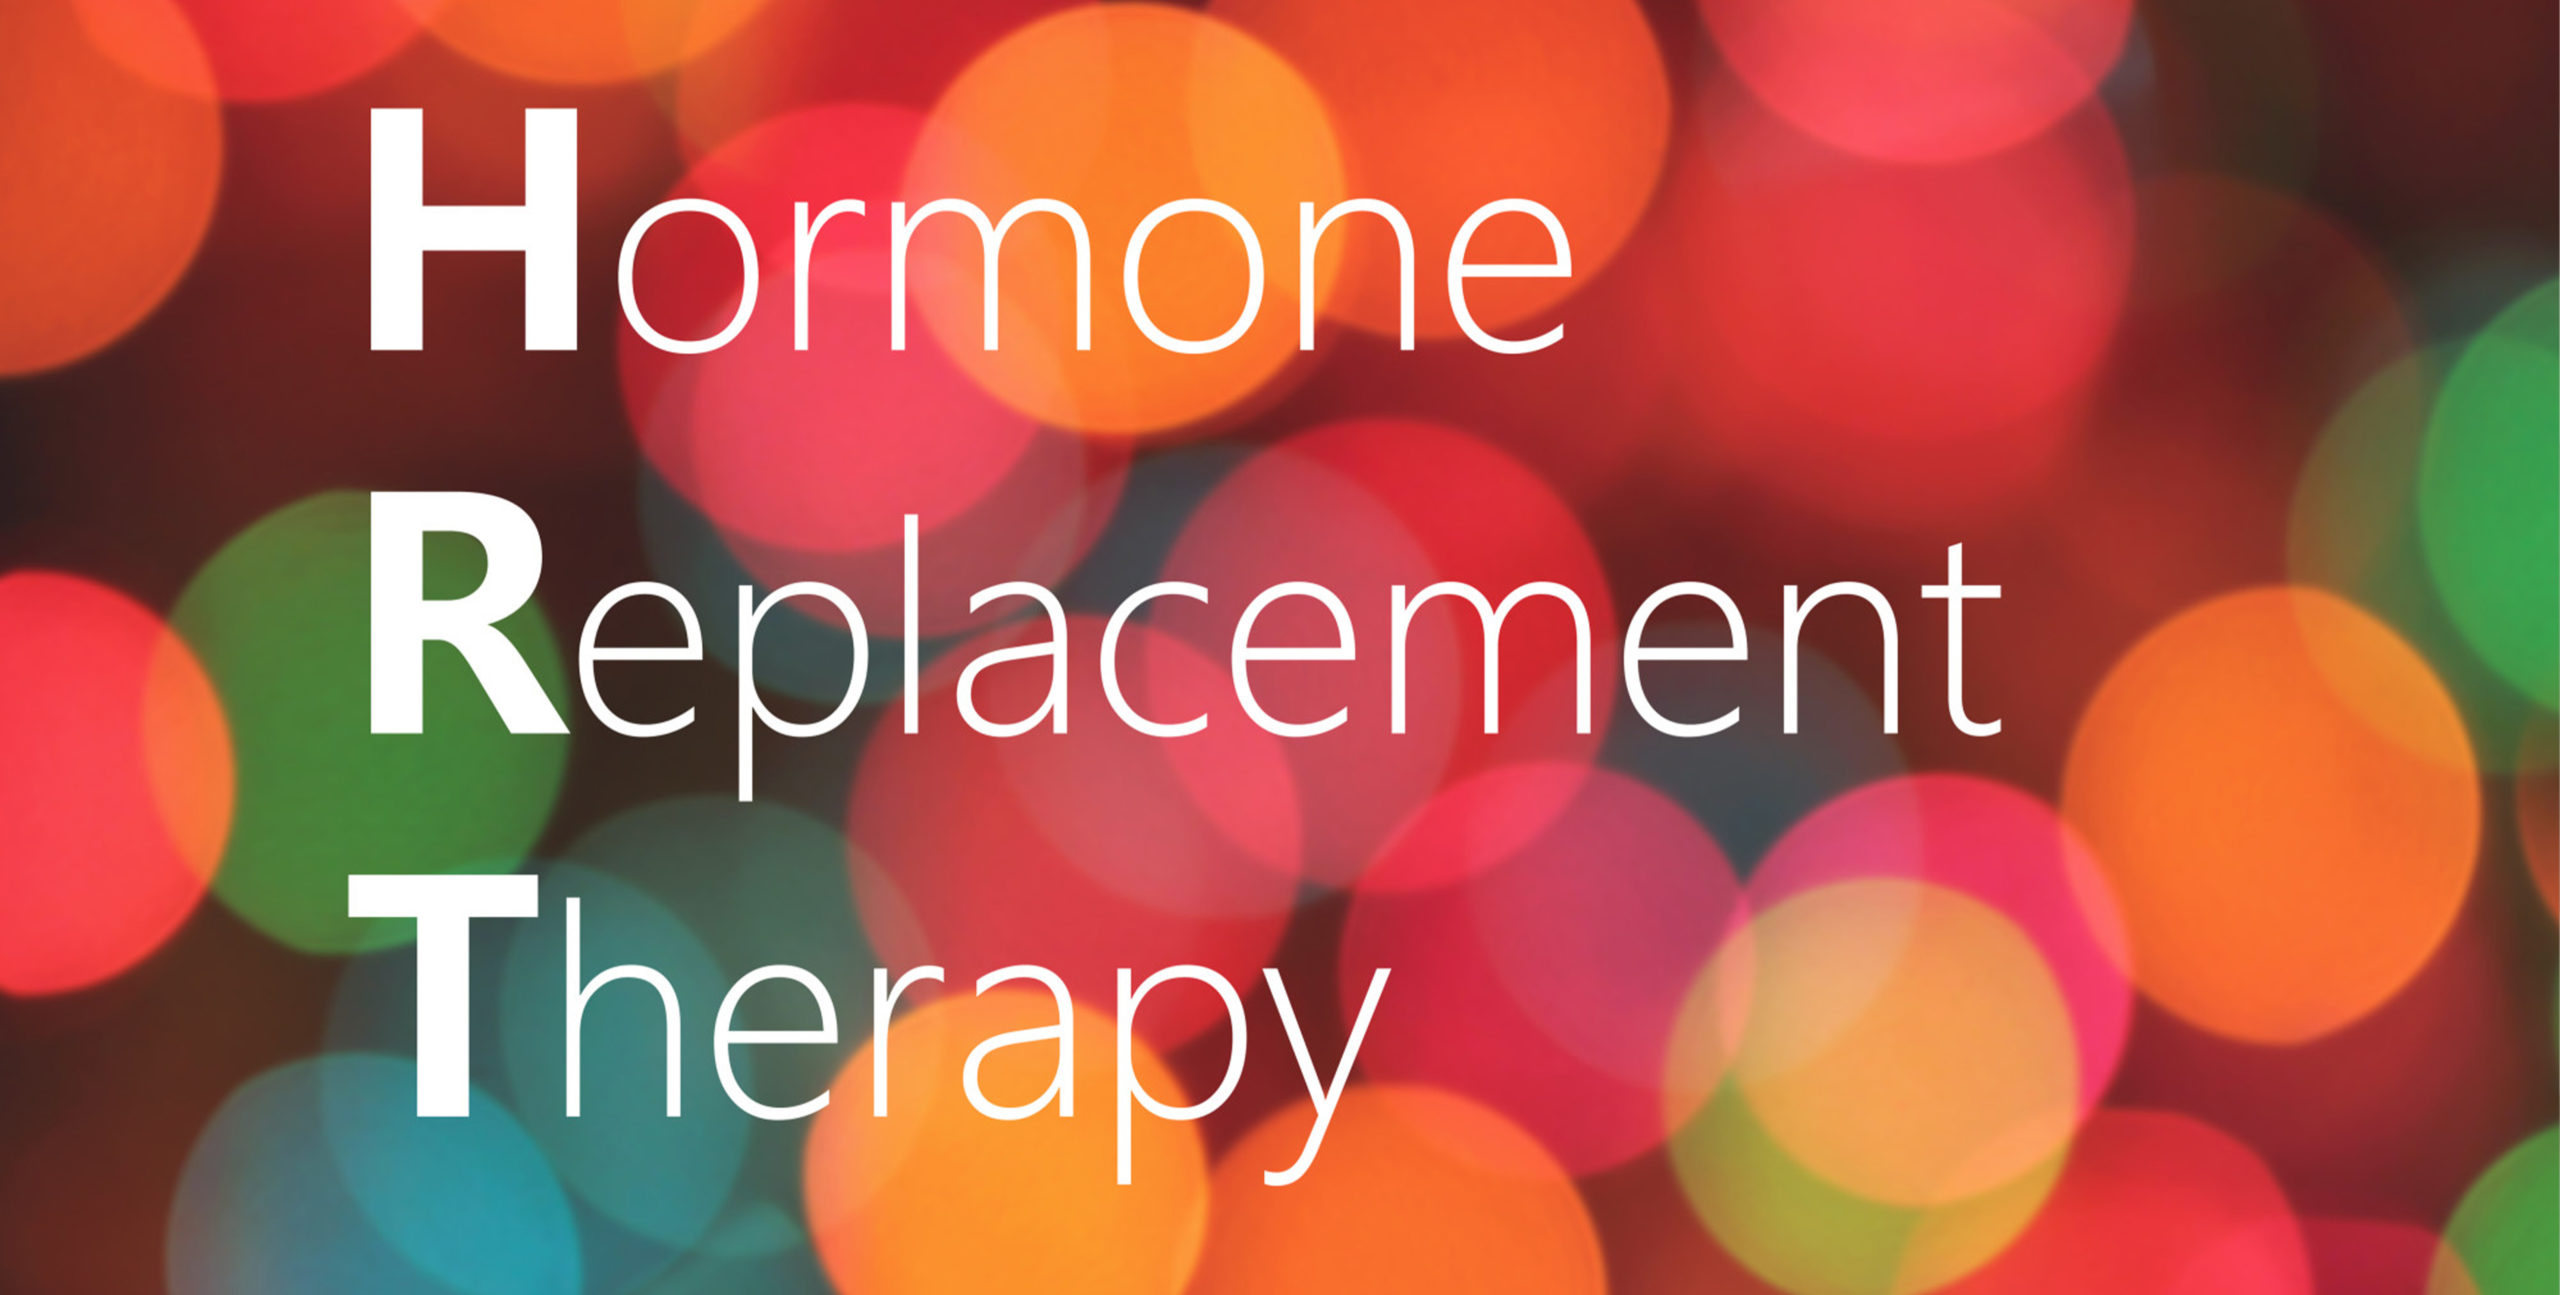 5 TYPES OF HORMONE REPLACEMENT THERAPY TO CONSIDER